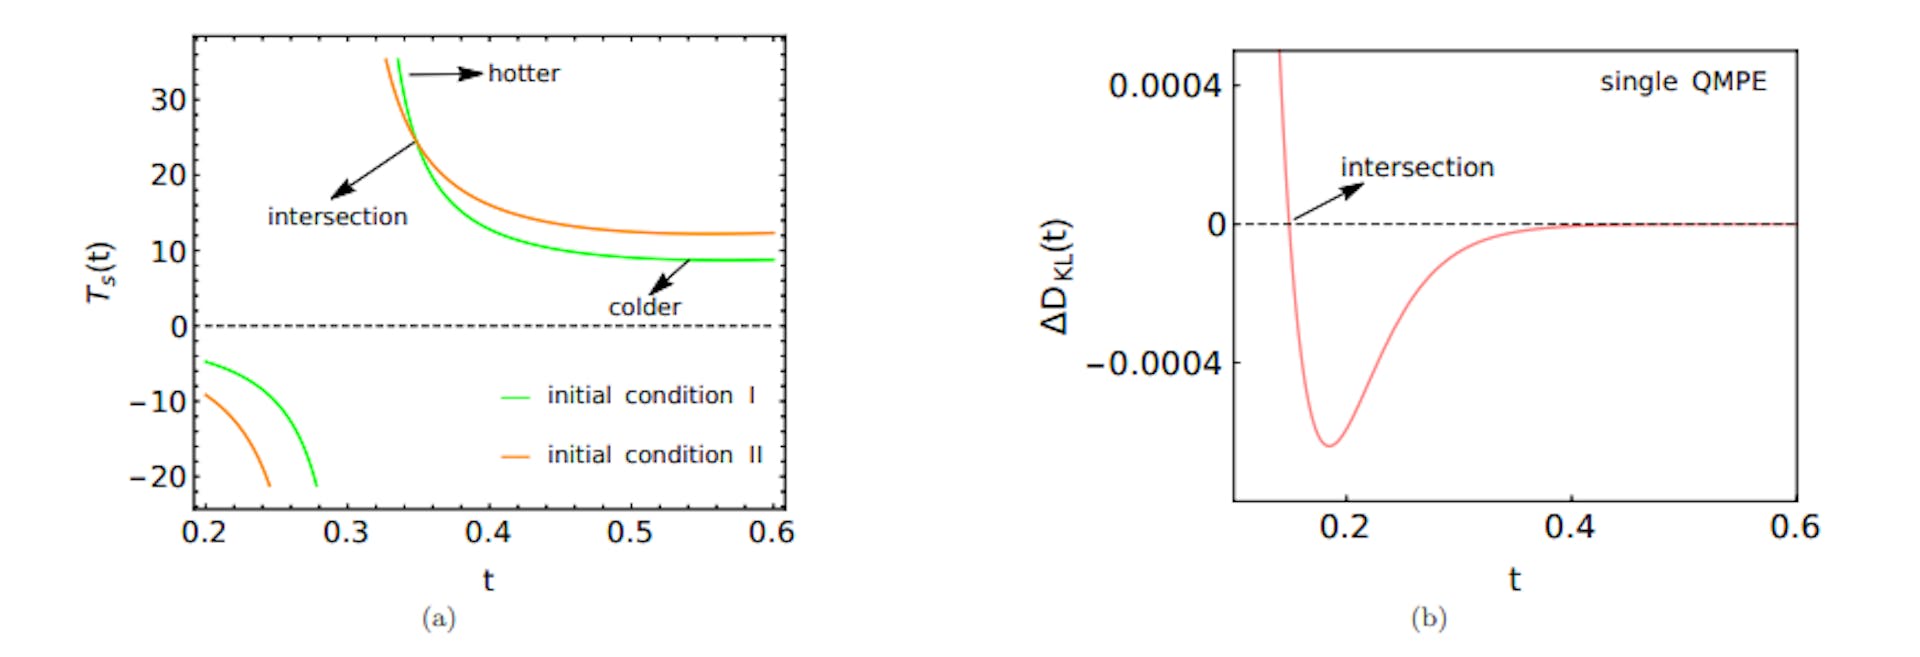 FIG. 14. The figure (a) shows thermal QMPE in region (b) where the temperatures of the two copies intersect each other once leading to single thermal QMPE. Parameters used are ˜d = 6.0, Γ˜I = 0.5, Γ˜II = 0.4, Γ = 6 ˜ √ 17, ˜dI = 3.0, ˜dII = 2.0. The figure (b) exhibits single QMPE in KL divergence in region (b). Parameters used for (b) are ˜d = 6.0, Γ˜I = 0.5, Γ˜II = 0.4, Γ = 6 ˜ √ 17, ˜dI = 3.0, d˜II = 2.0.